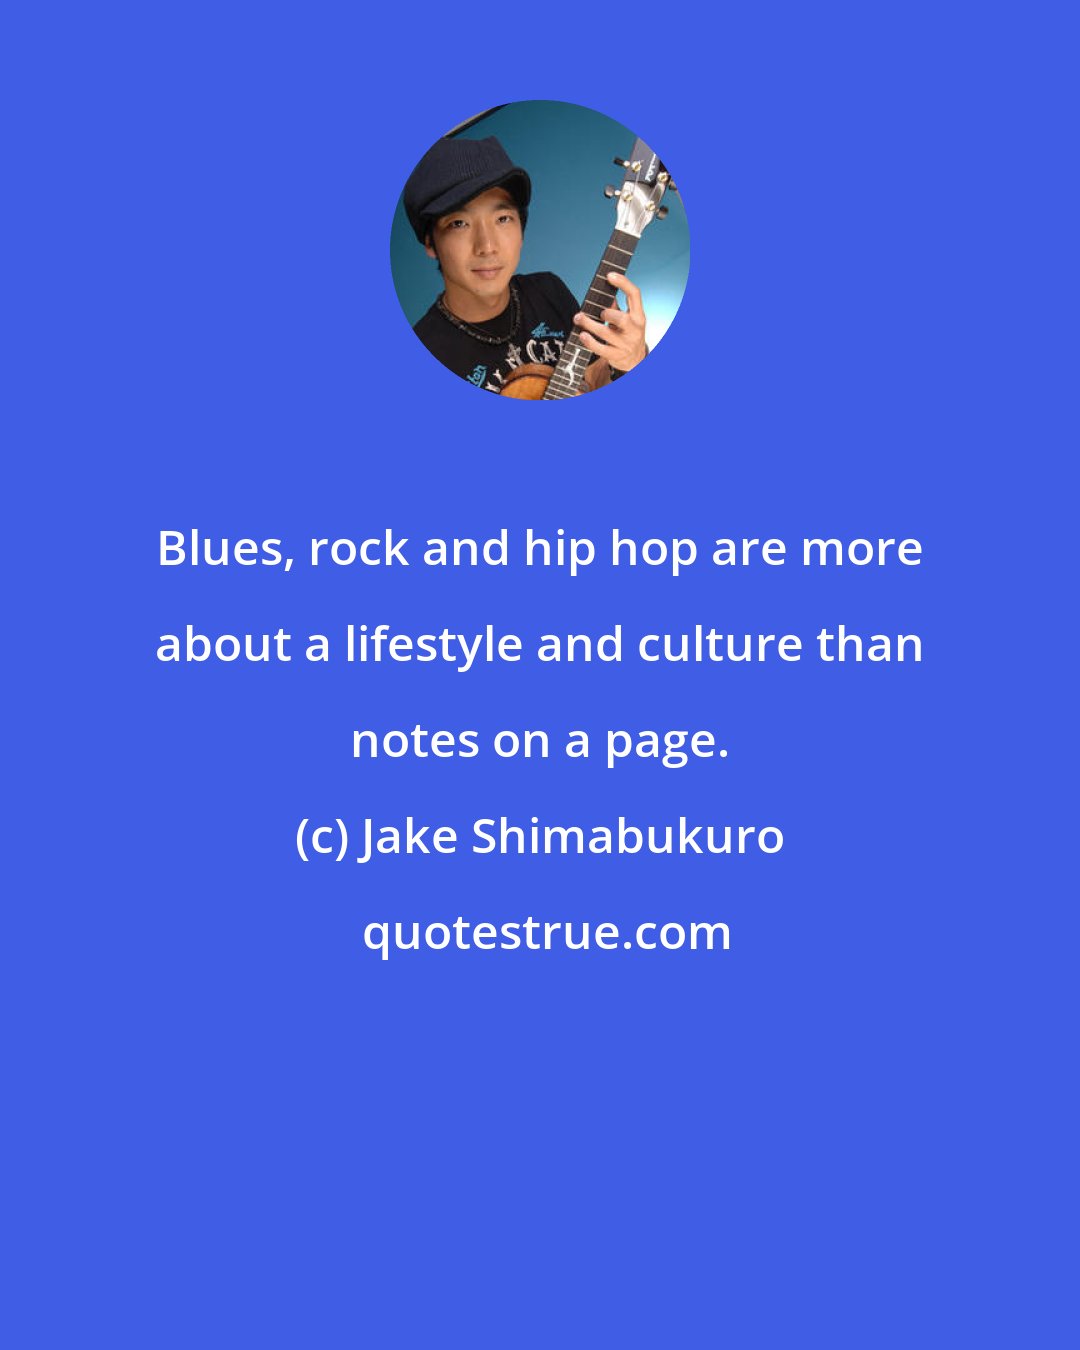 Jake Shimabukuro: Blues, rock and hip hop are more about a lifestyle and culture than notes on a page.